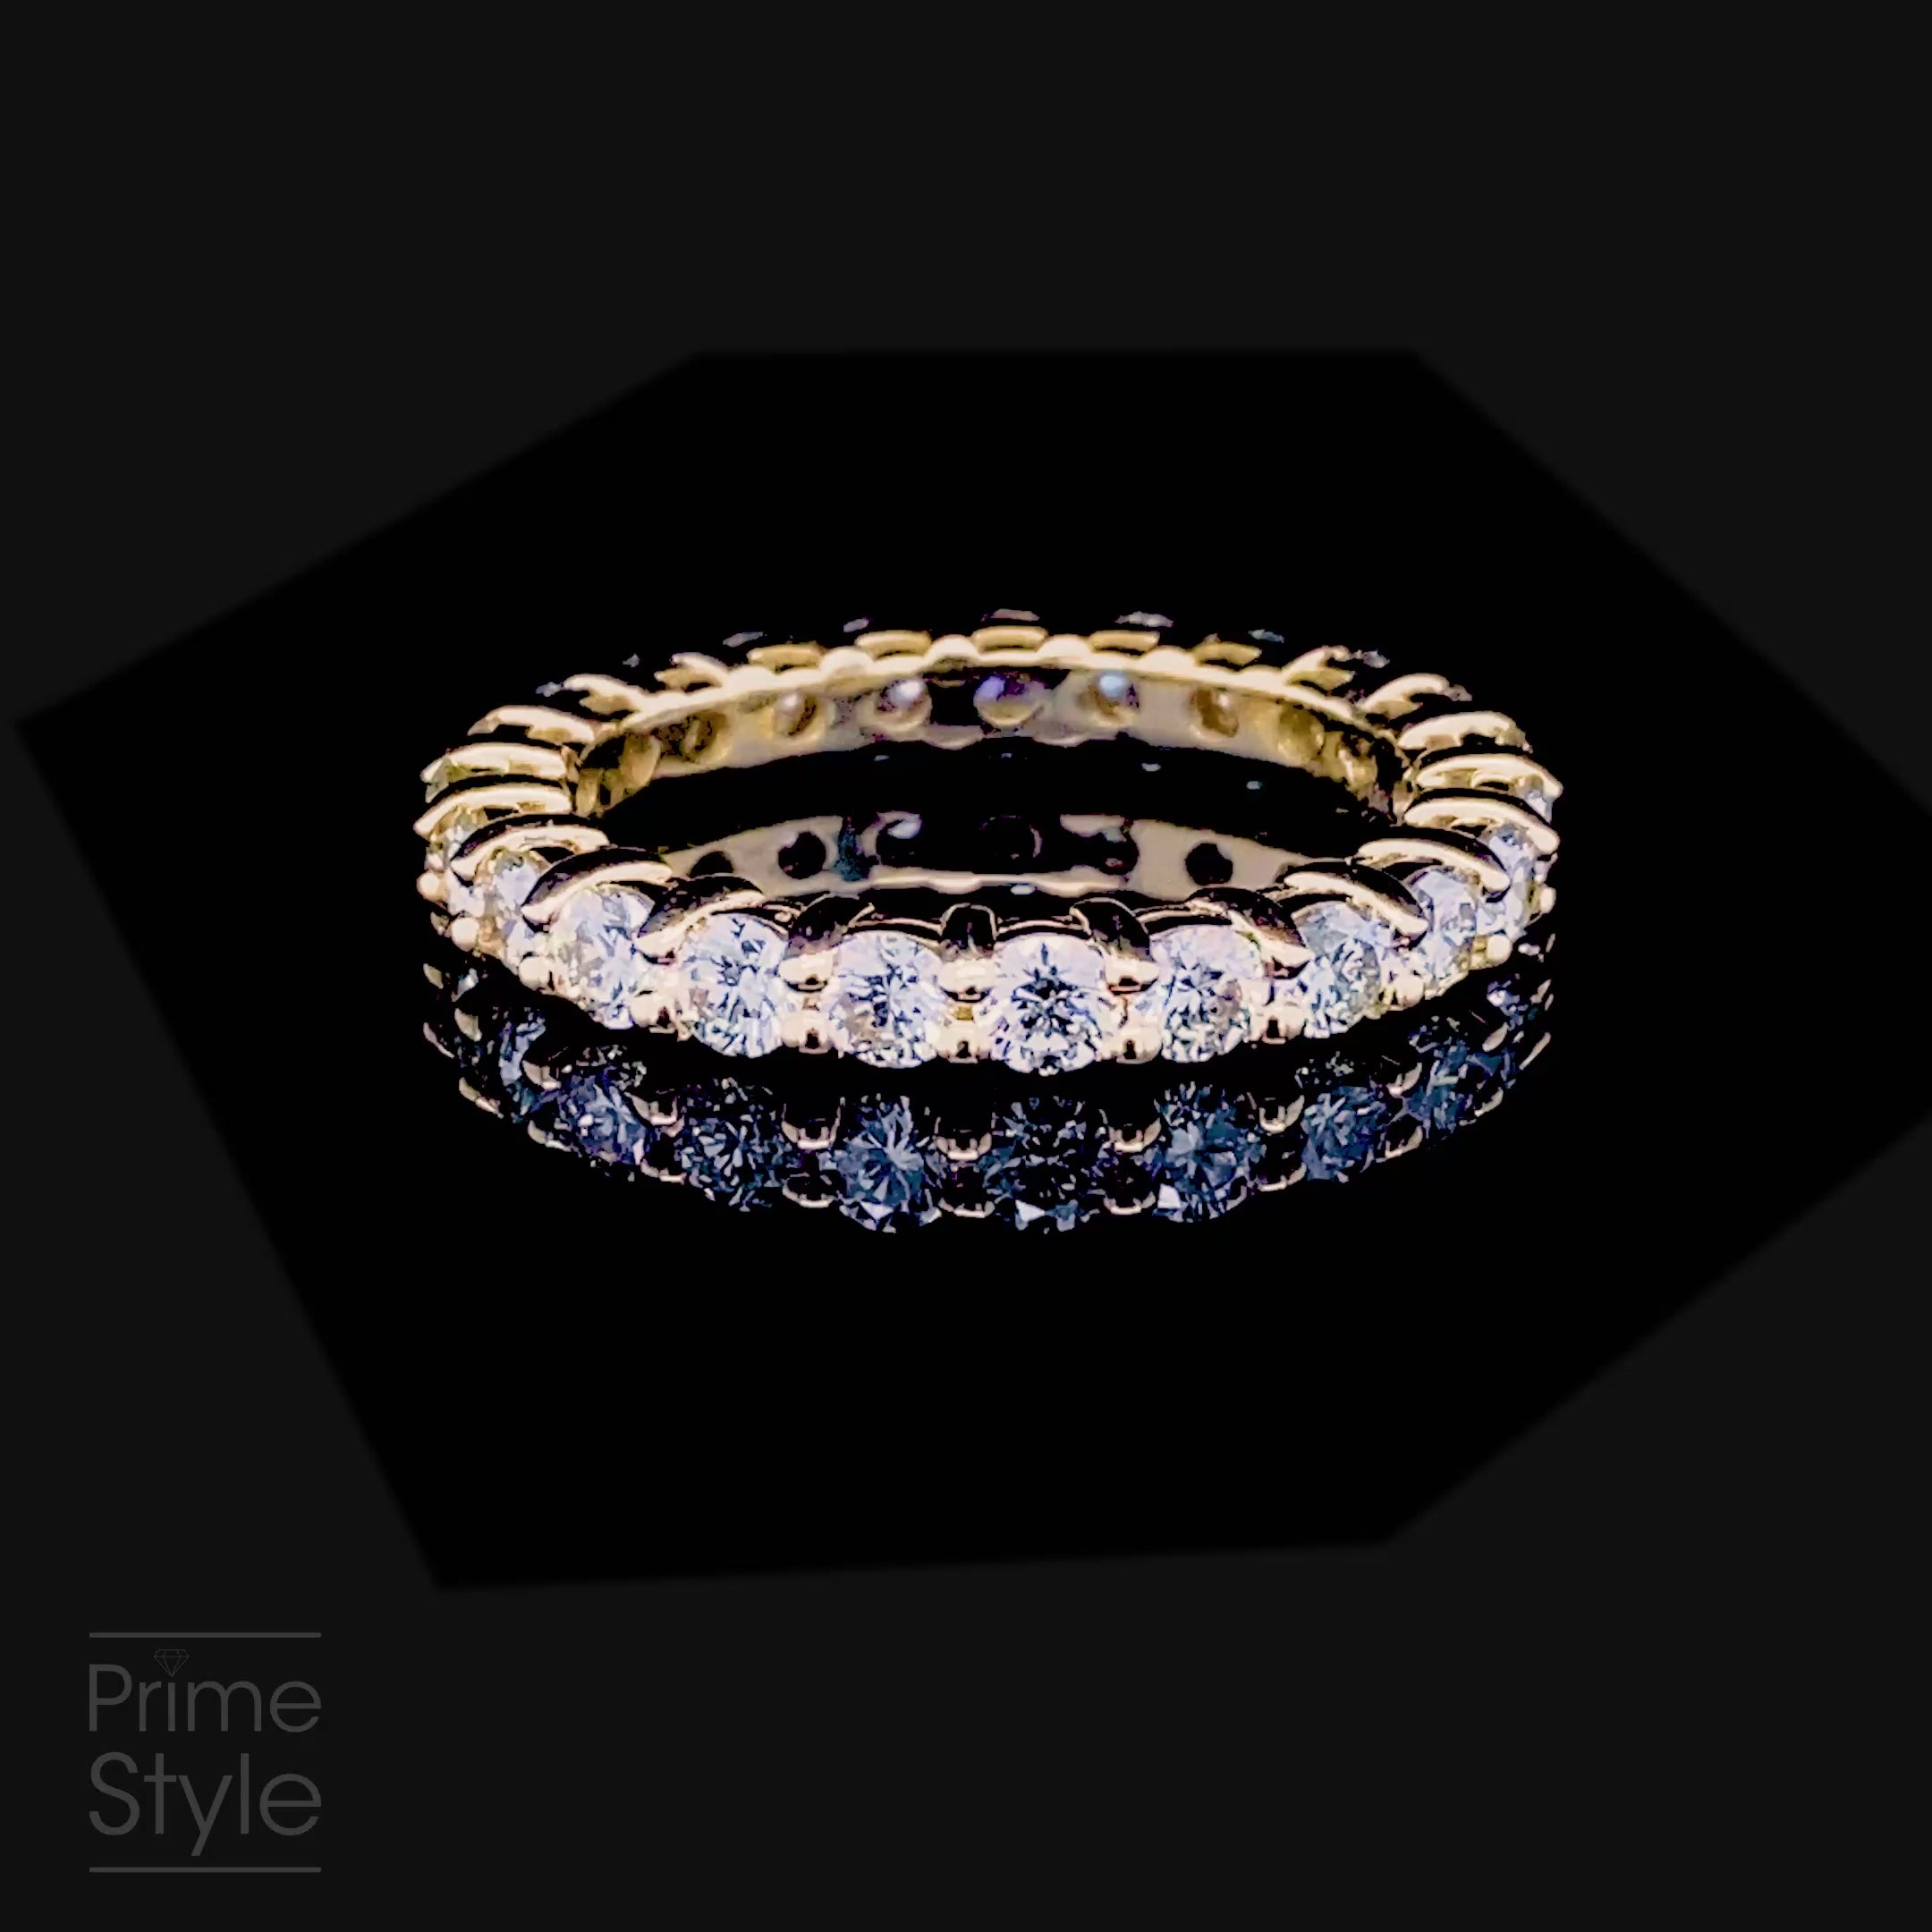 Blissful 2.50CT Round Cut Diamond Eternity Ring in 14KT Yellow Gold